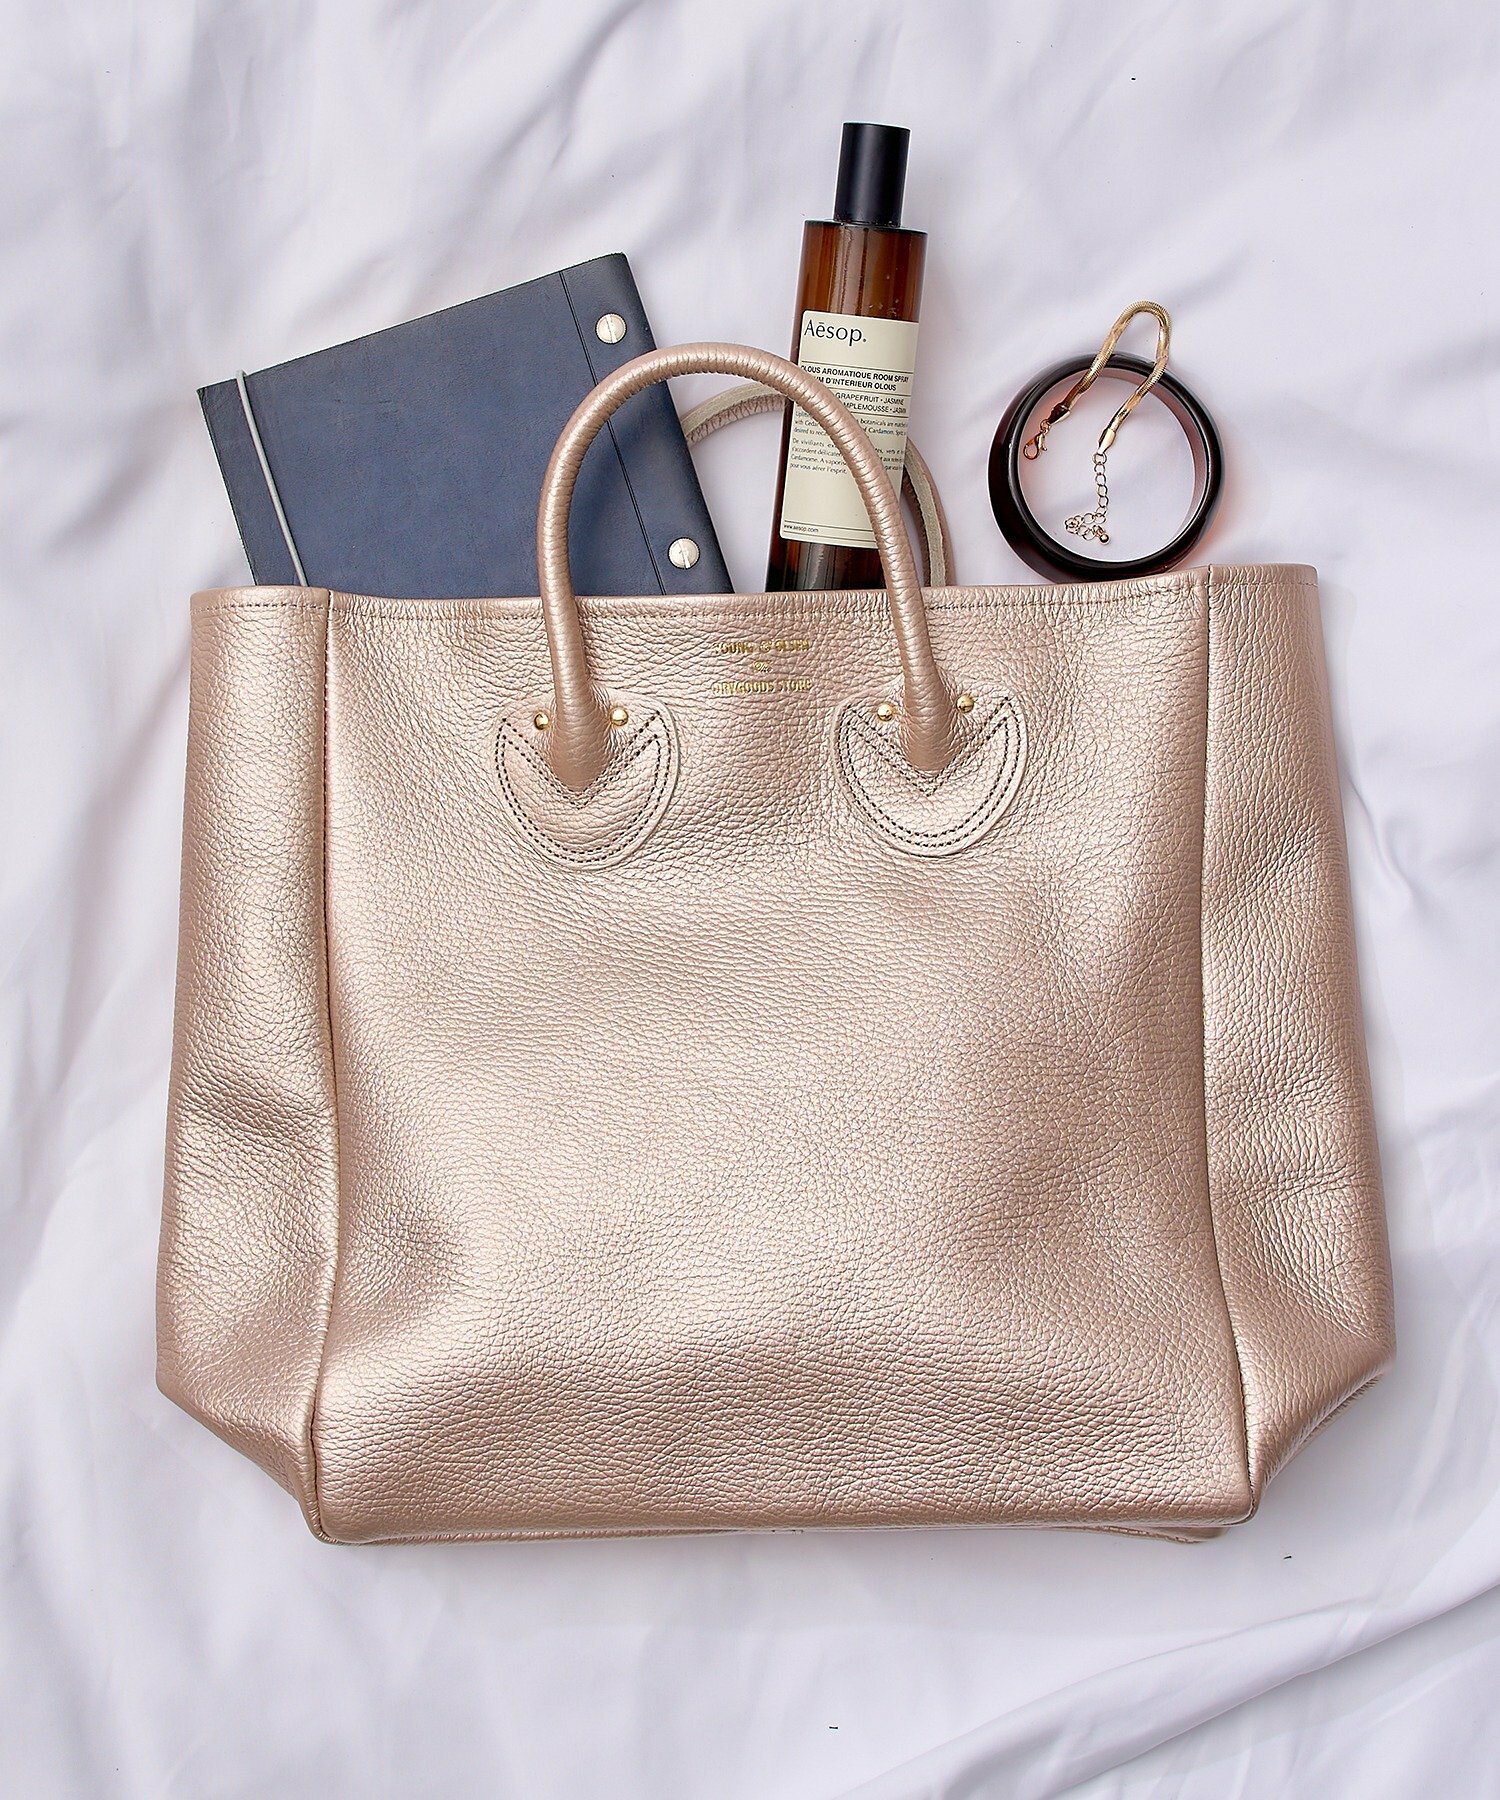 YOUNG&OLSEN/EMBOSSED LEATHER TOTE M ヤングアンドオルセン エンボス レザートート  バッグ 本革  M